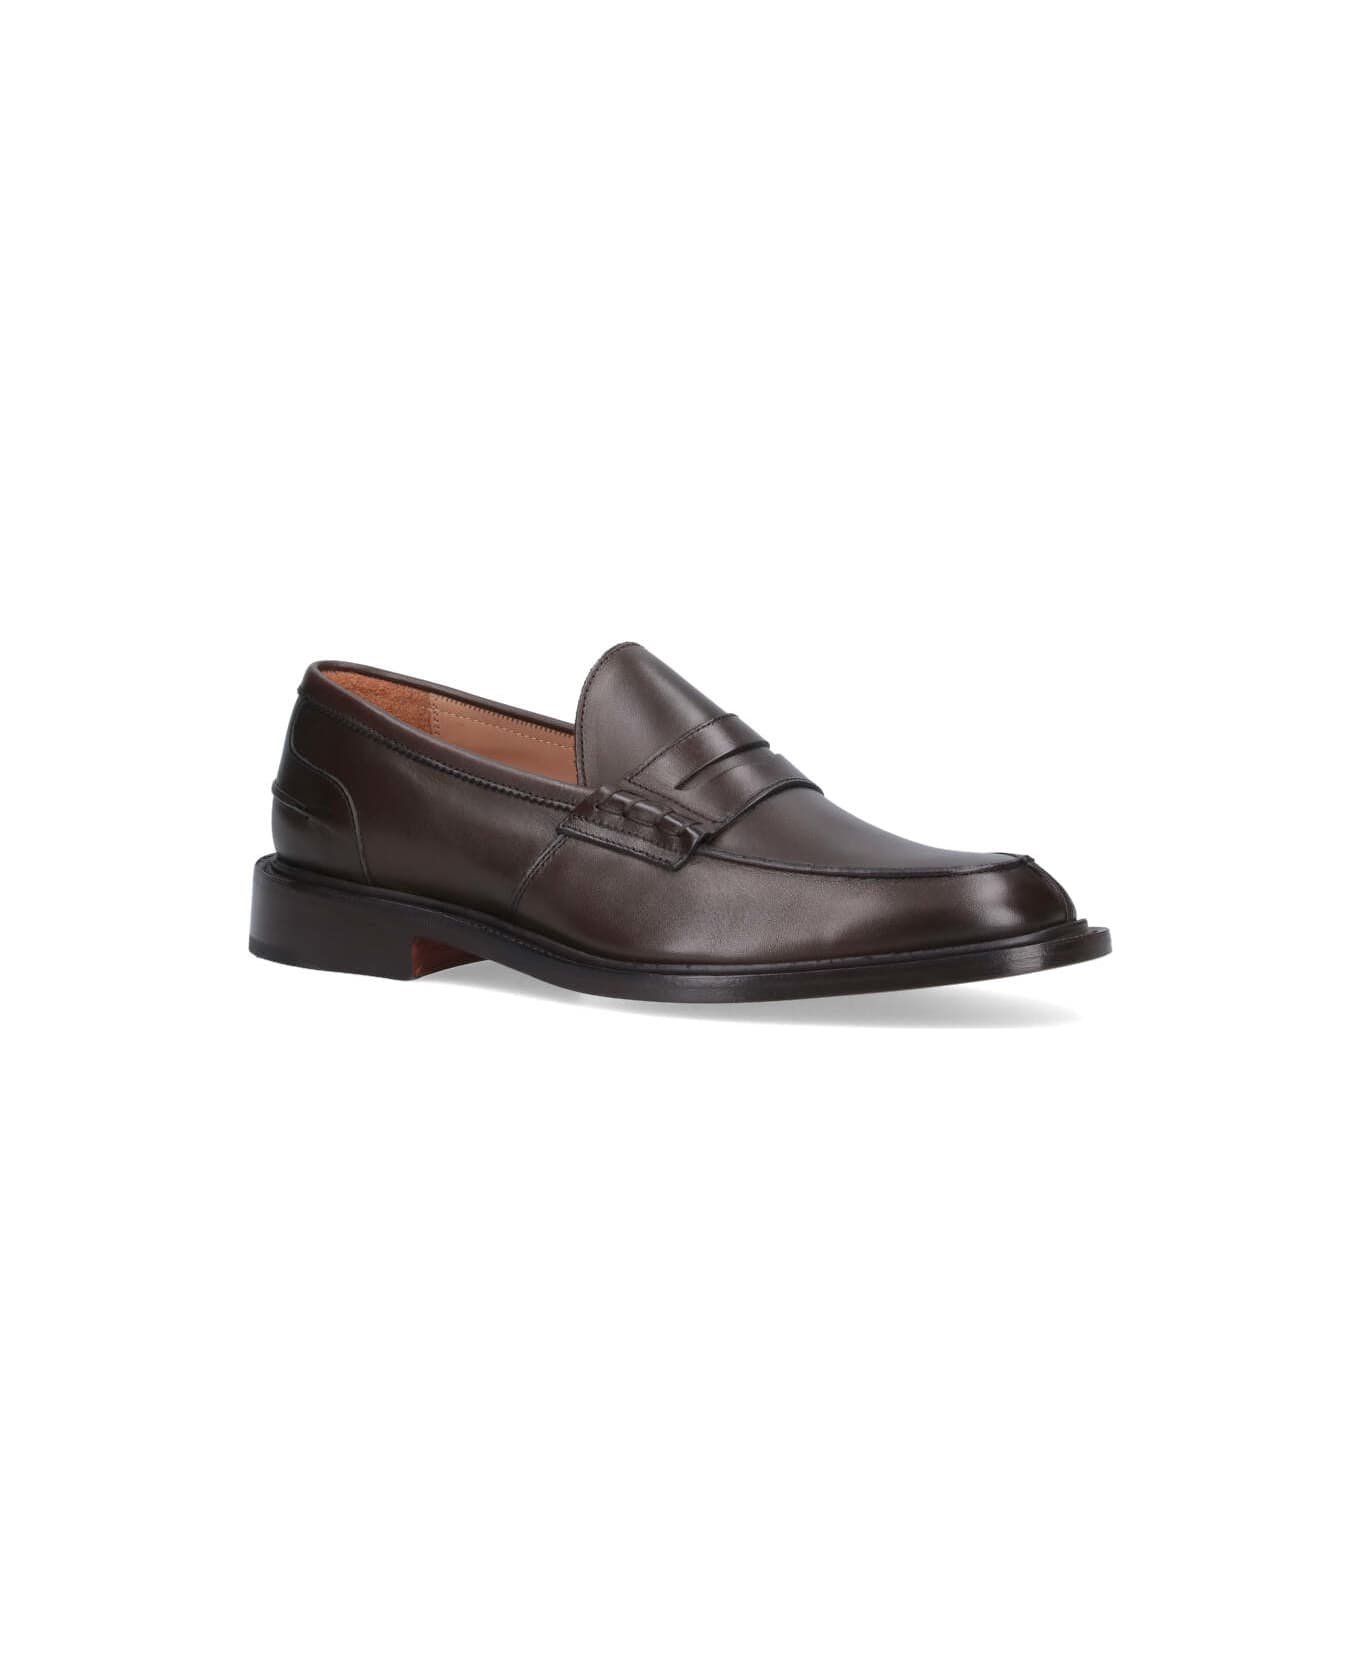 Tricker's 'james' Loafers - Brown